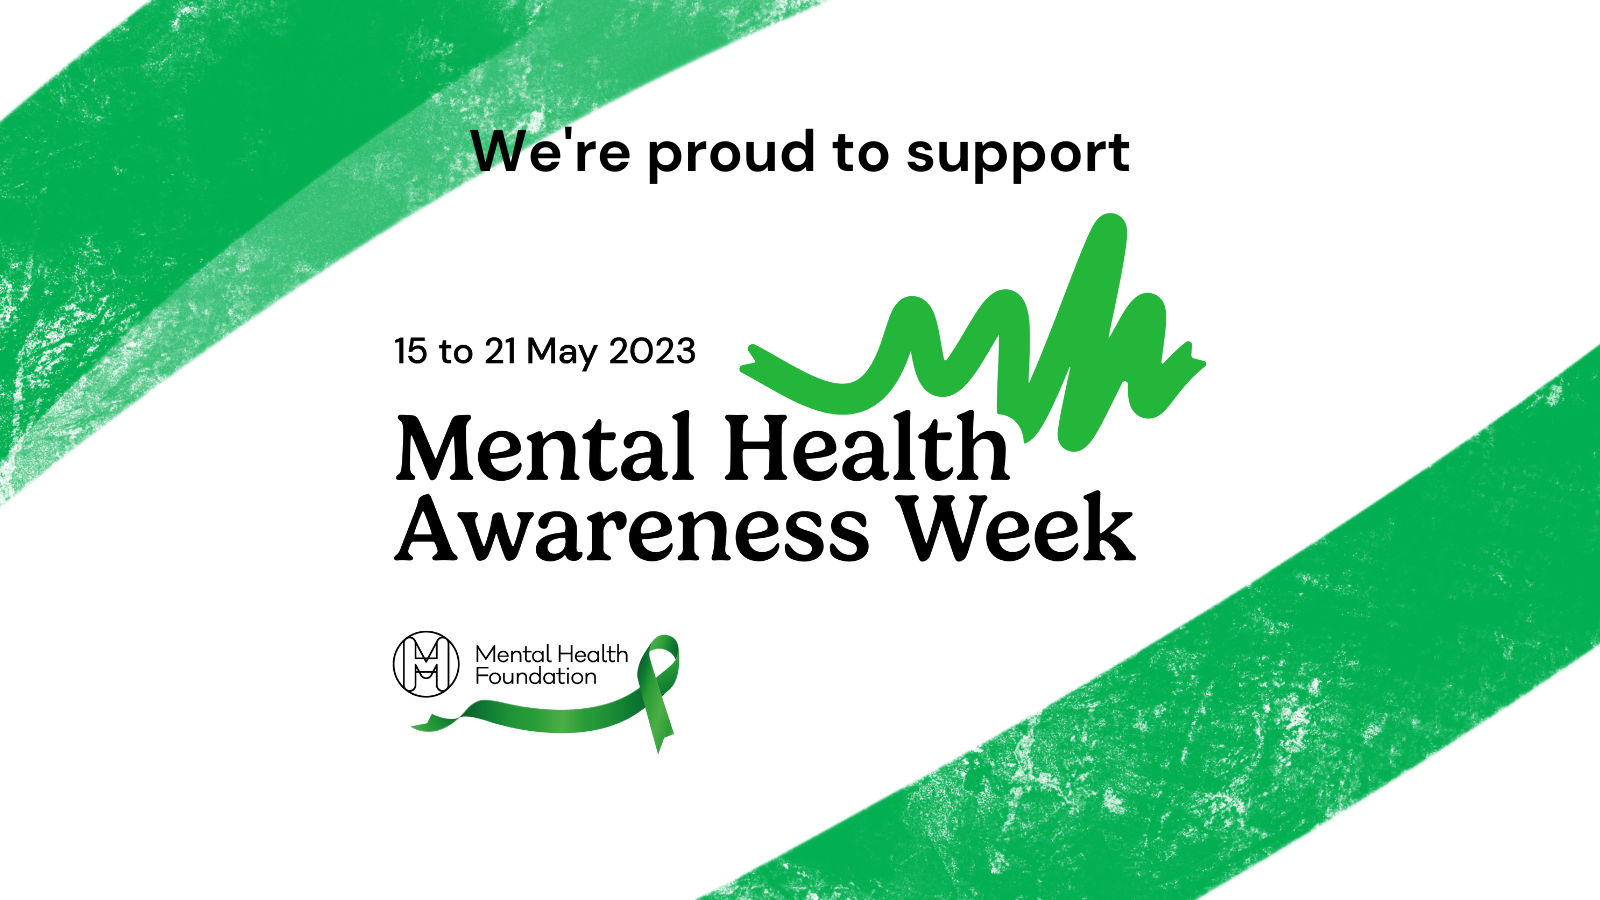 Incodia join in to celebrate Mental Health Awareness Week from 15 to 21 May 2023